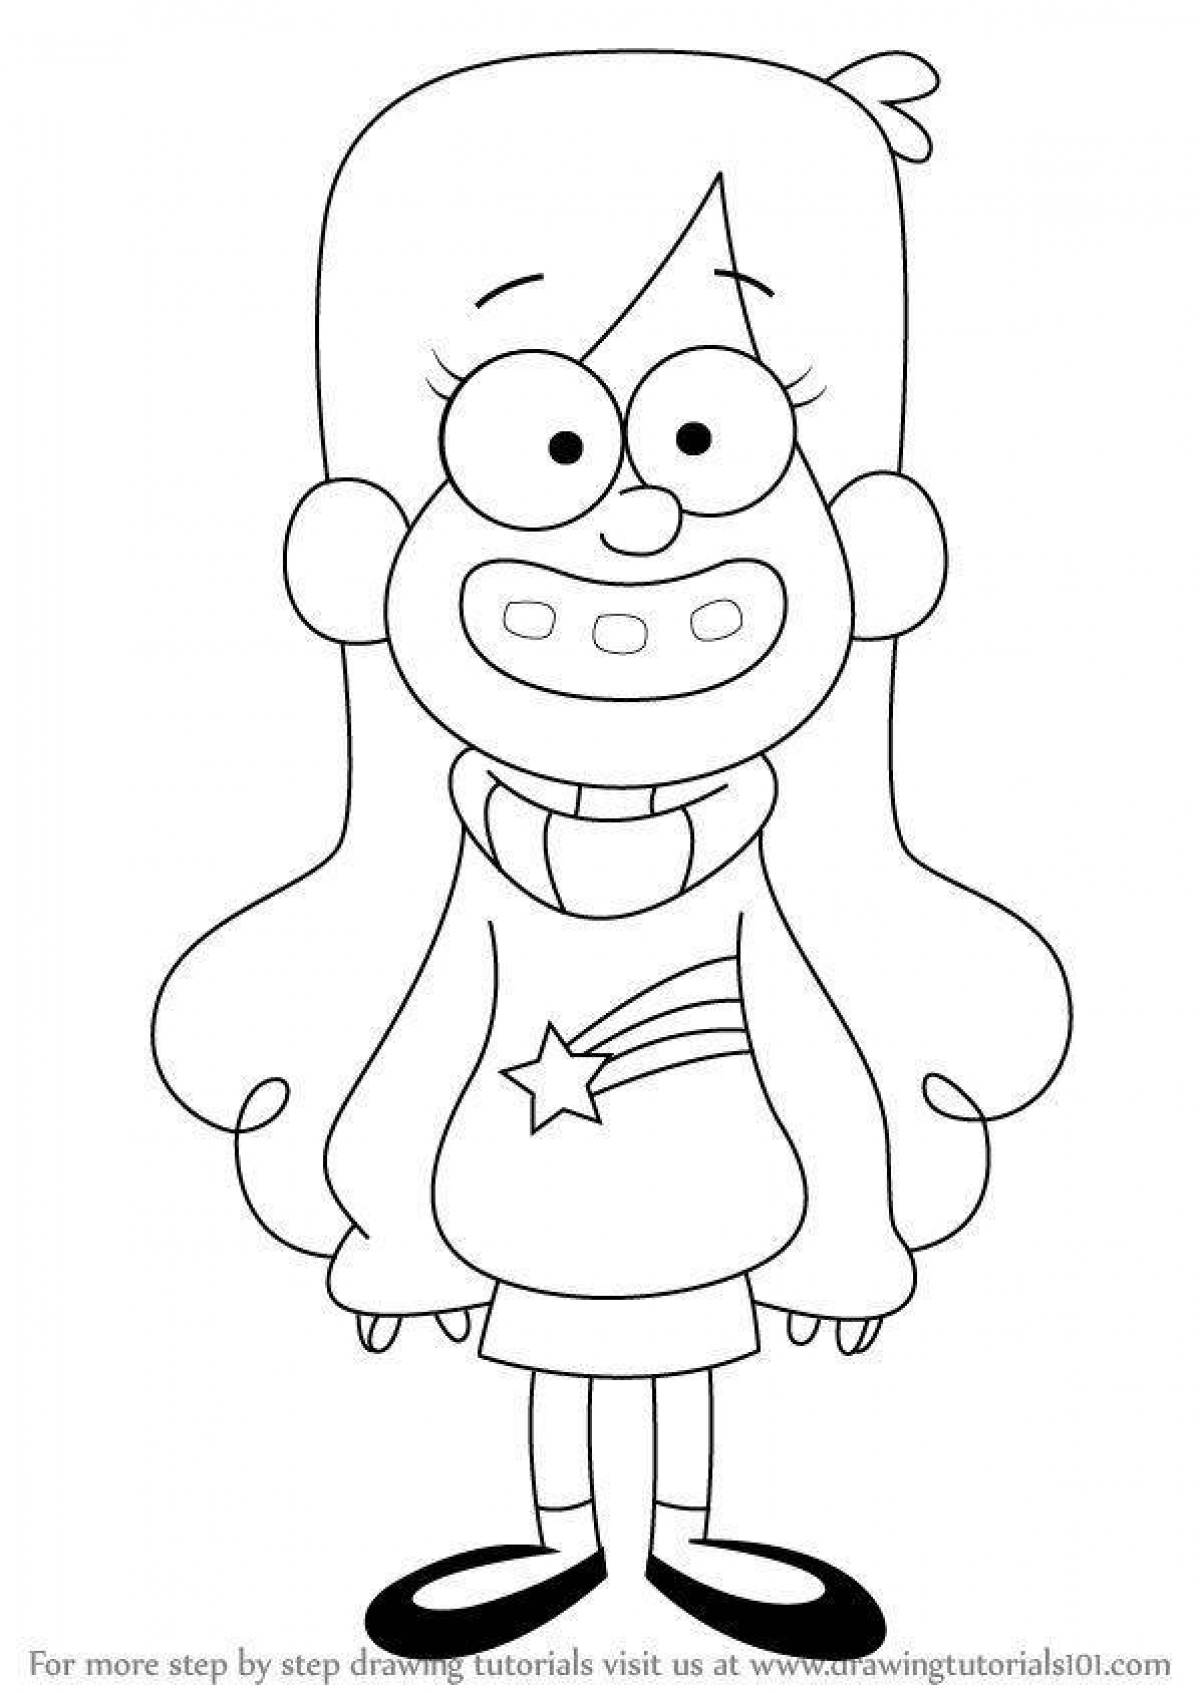 Charming mabel from gravity falls